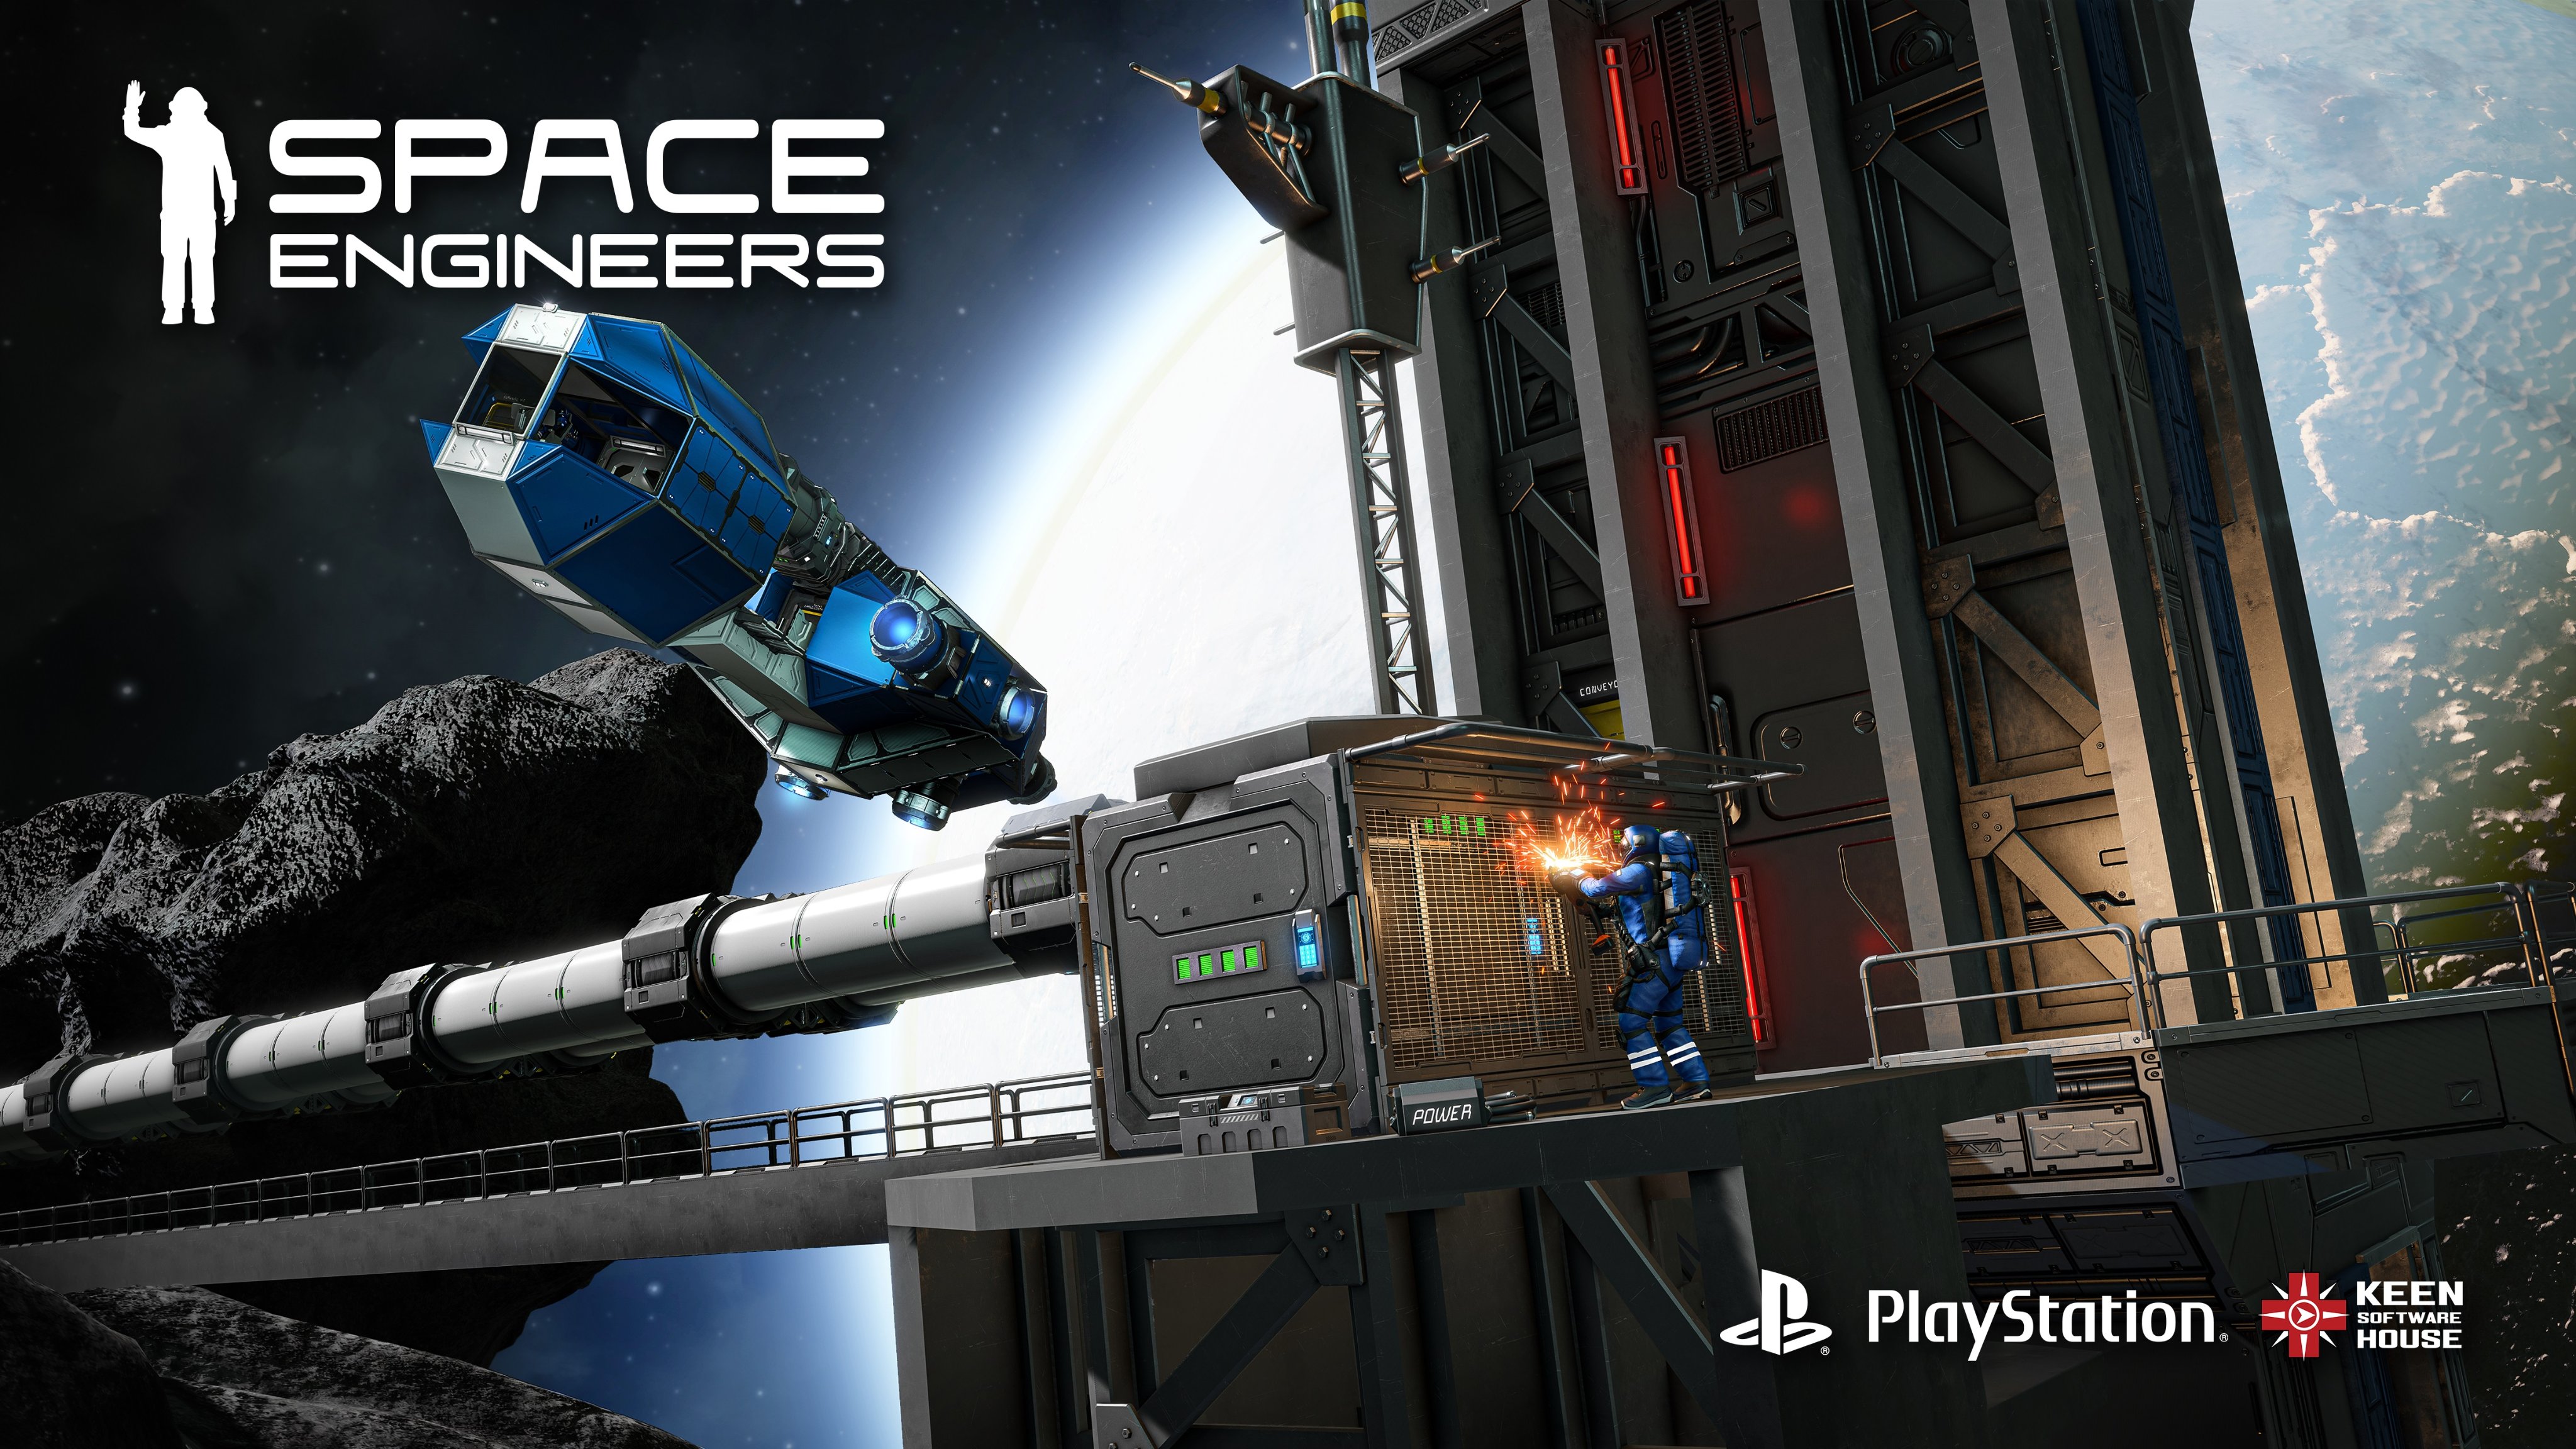 Space Engineers on Twitter: "Space Beta is live on PlayStation! 💻 Full crossplay - XBOX, PC PlayStation ➡️ Blog Post: https://t.co/cX8lgbxL9p the Beta! https://t.co/zCty8FW3f6 📡 Discord: https://t.co/OChj46uVNZ ...